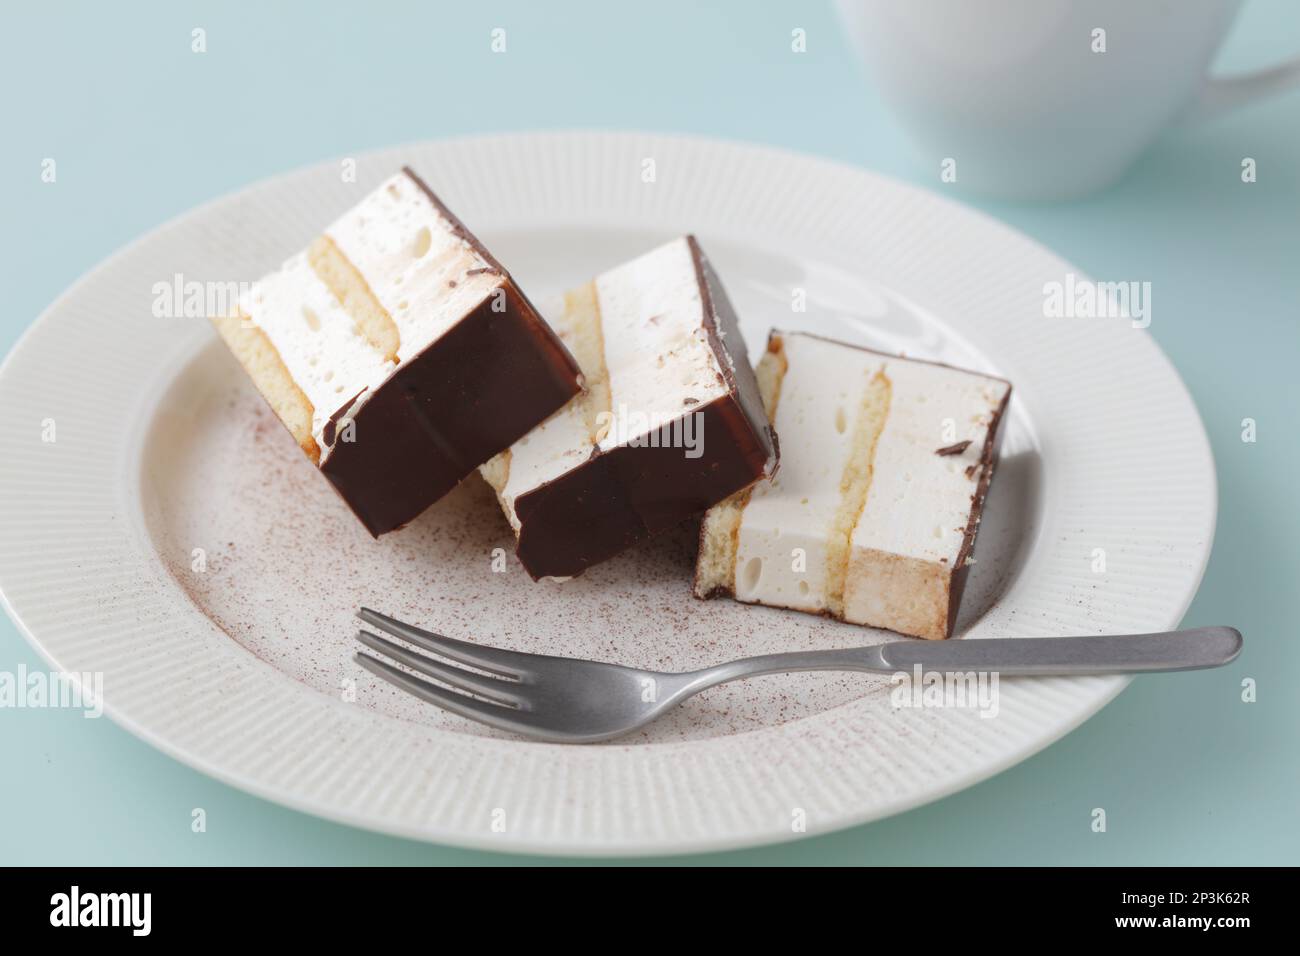 Three slices of souffle cake covered by chocolate on a table Stock Photo